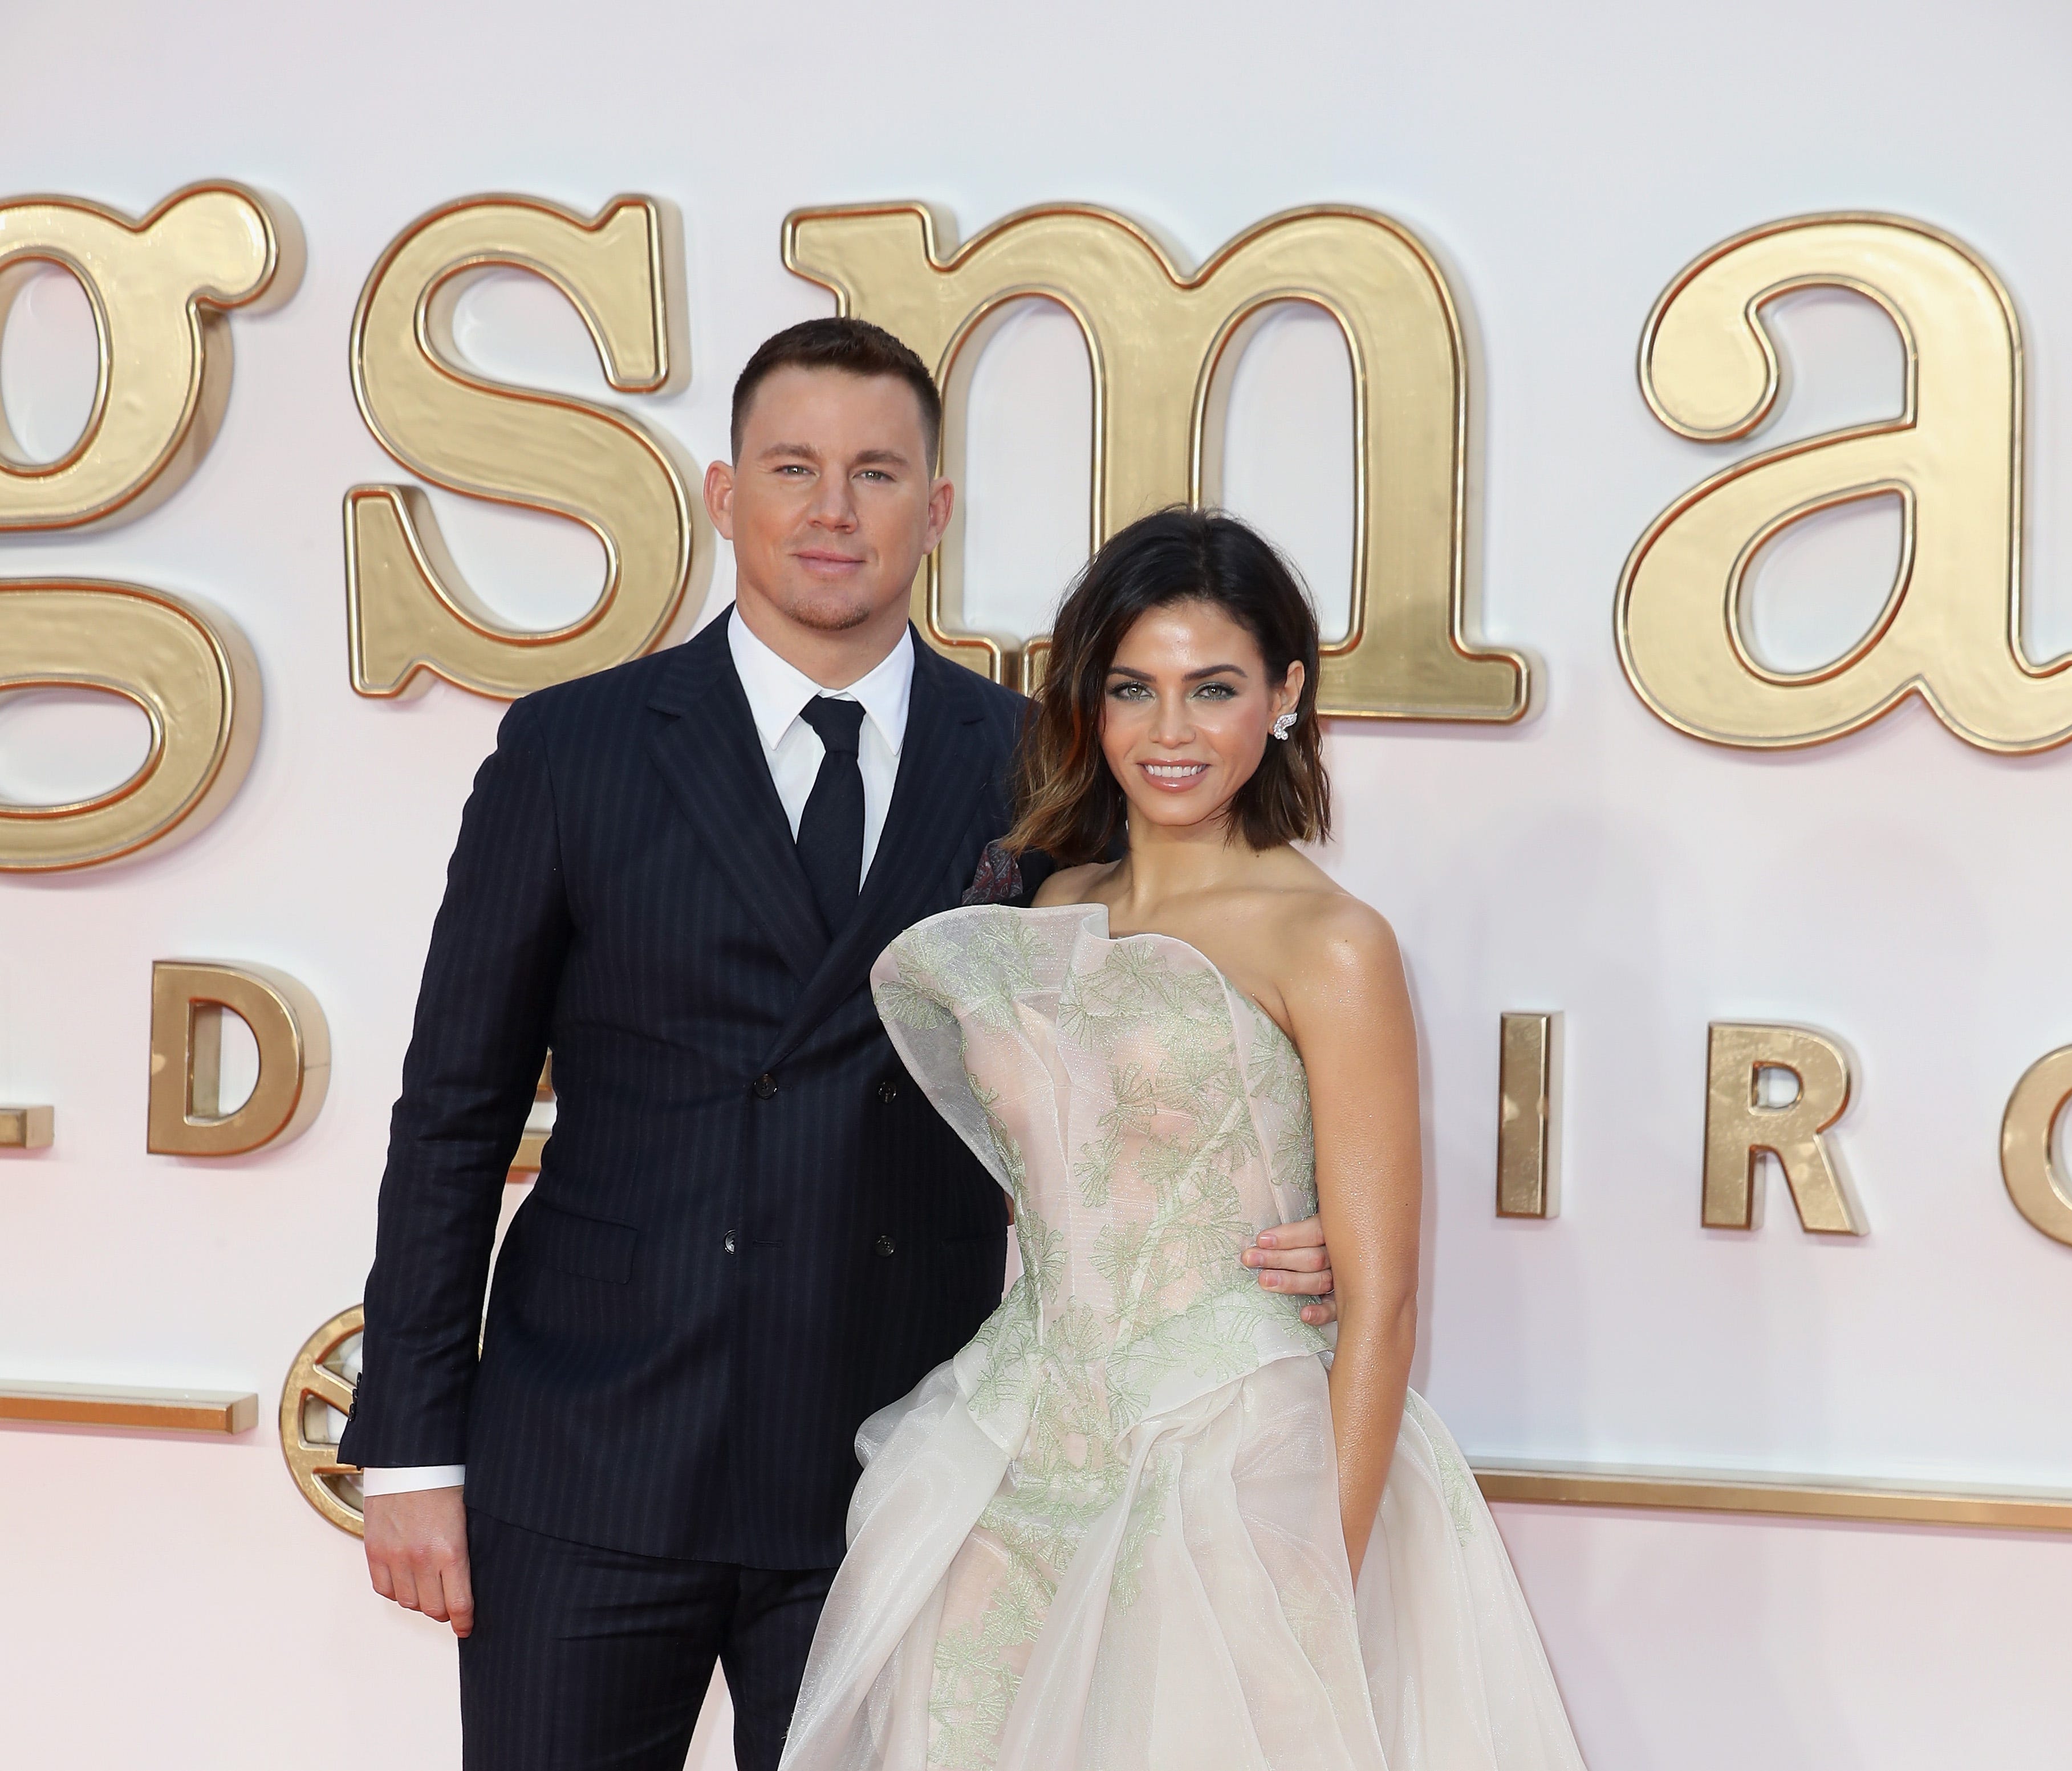 Channing Tatum and Jenna Dewan Tatum have announced that they are separating after nine years of marriage.